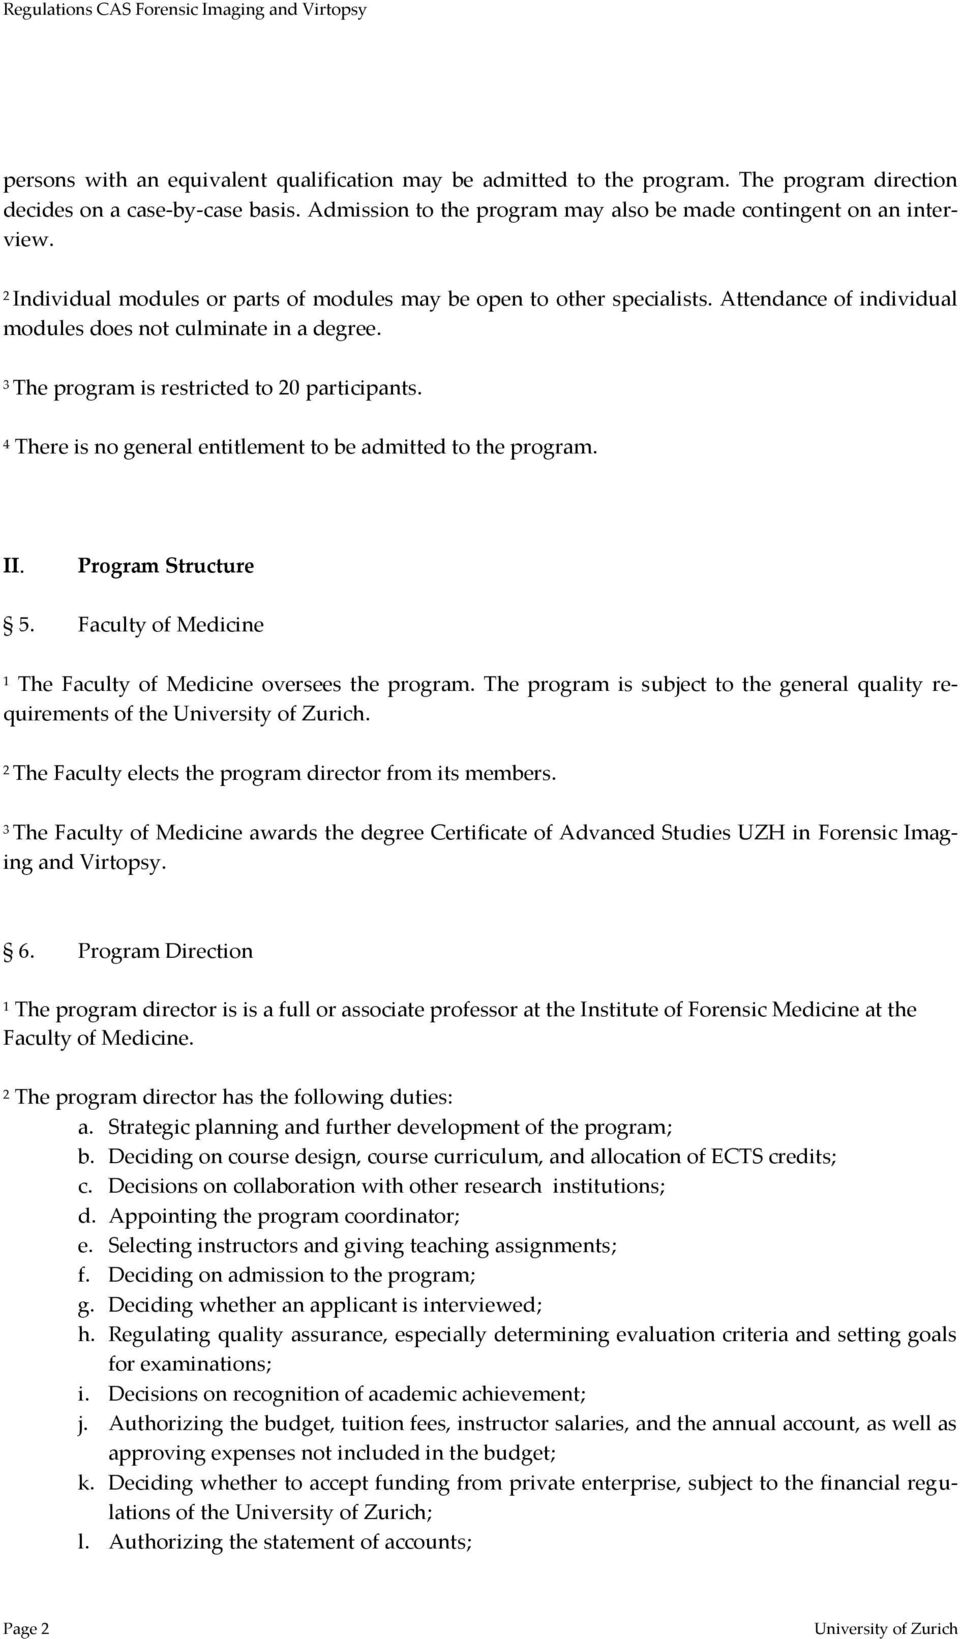 There is no general entitlement to be admitted to the program. II. Program Structure 5. Faculty of Medicine The Faculty of Medicine oversees the program.